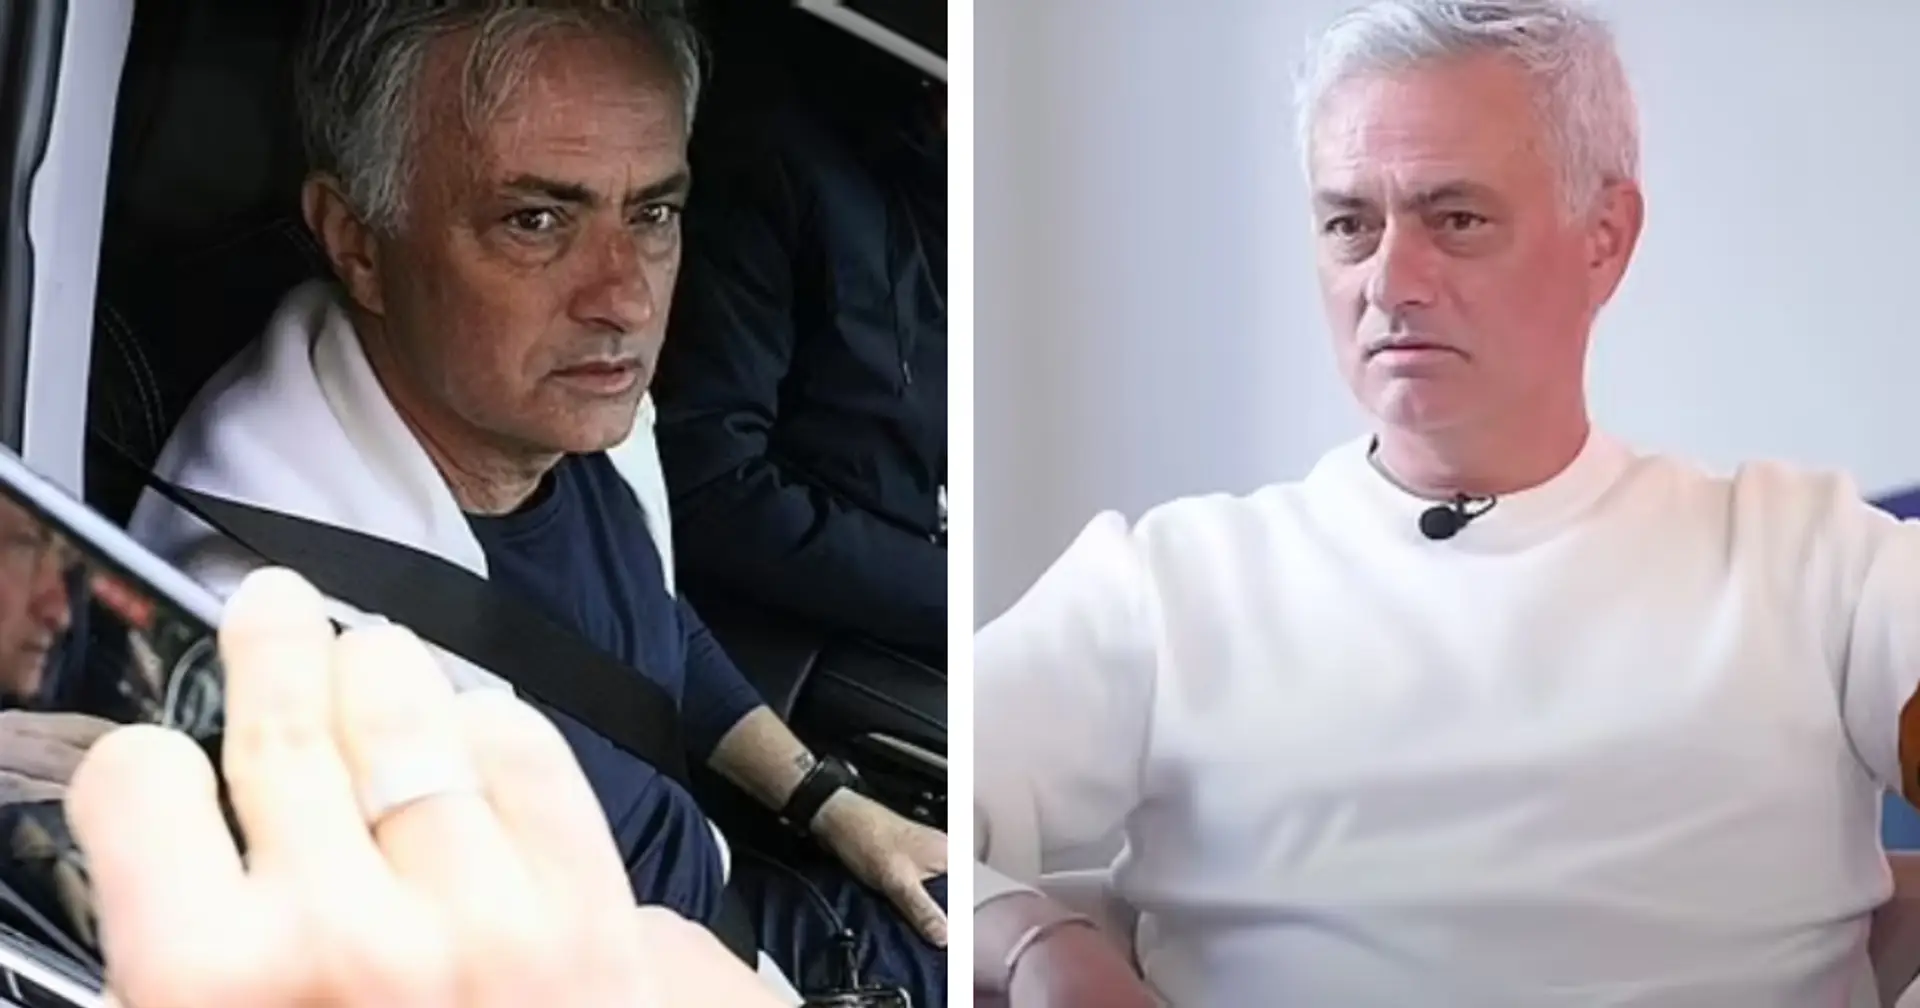 'It hurt the most': Jose Mourinho opens up on Roma sacking